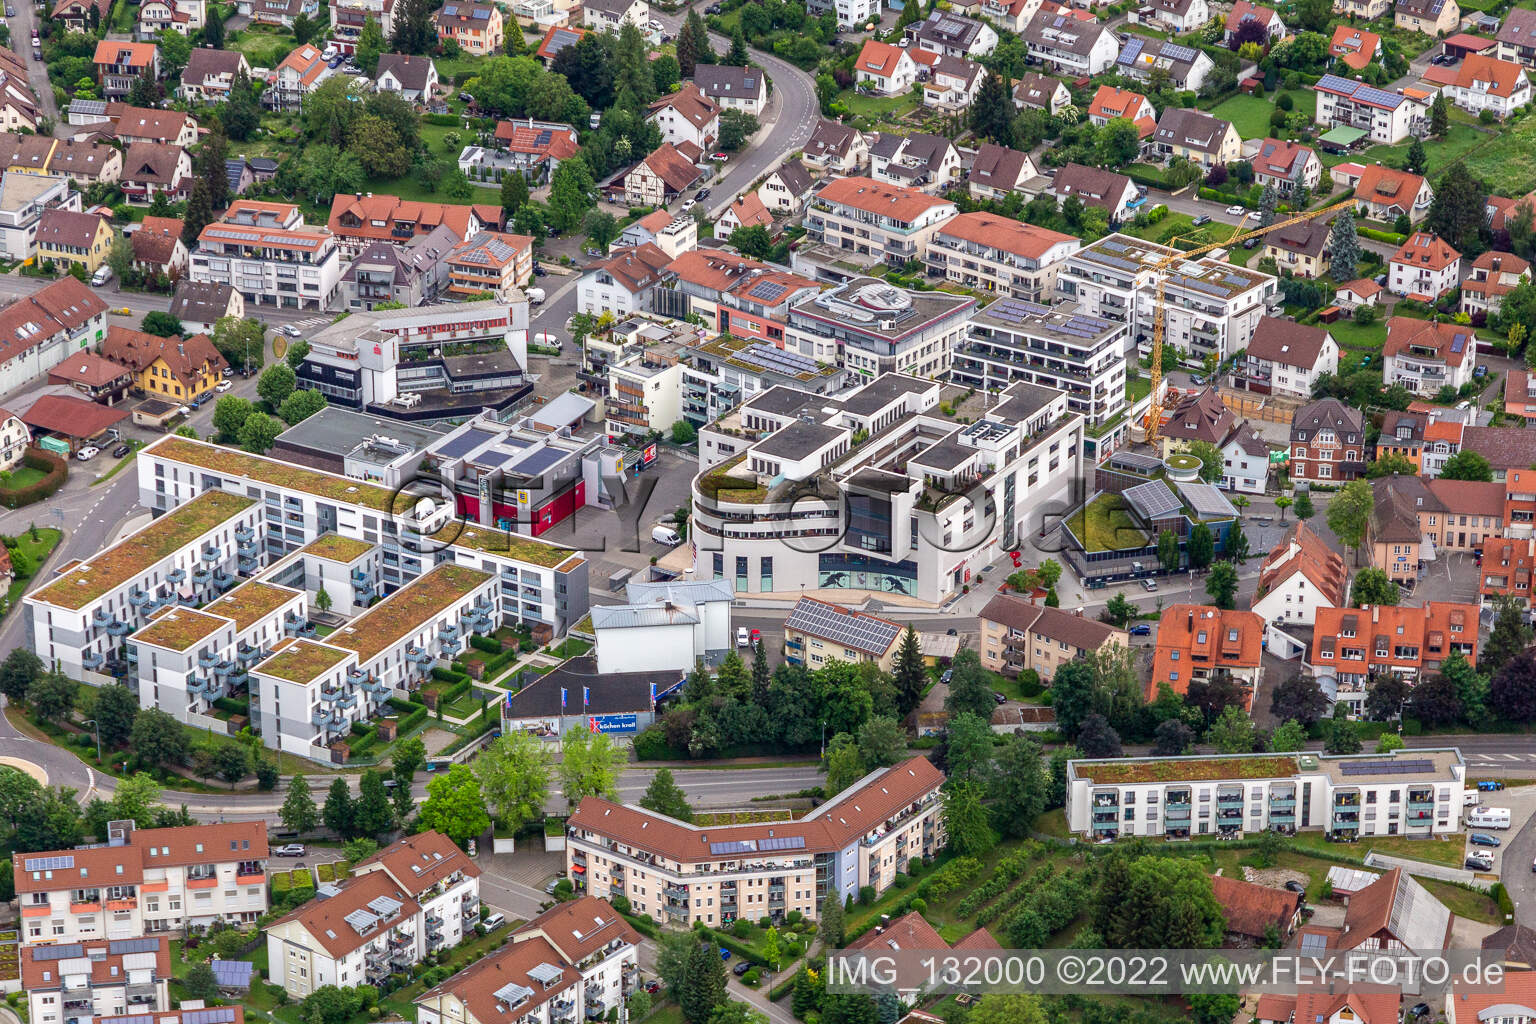 PROMA shopping center Lake Constance in Markdorf in the state Baden-Wuerttemberg, Germany